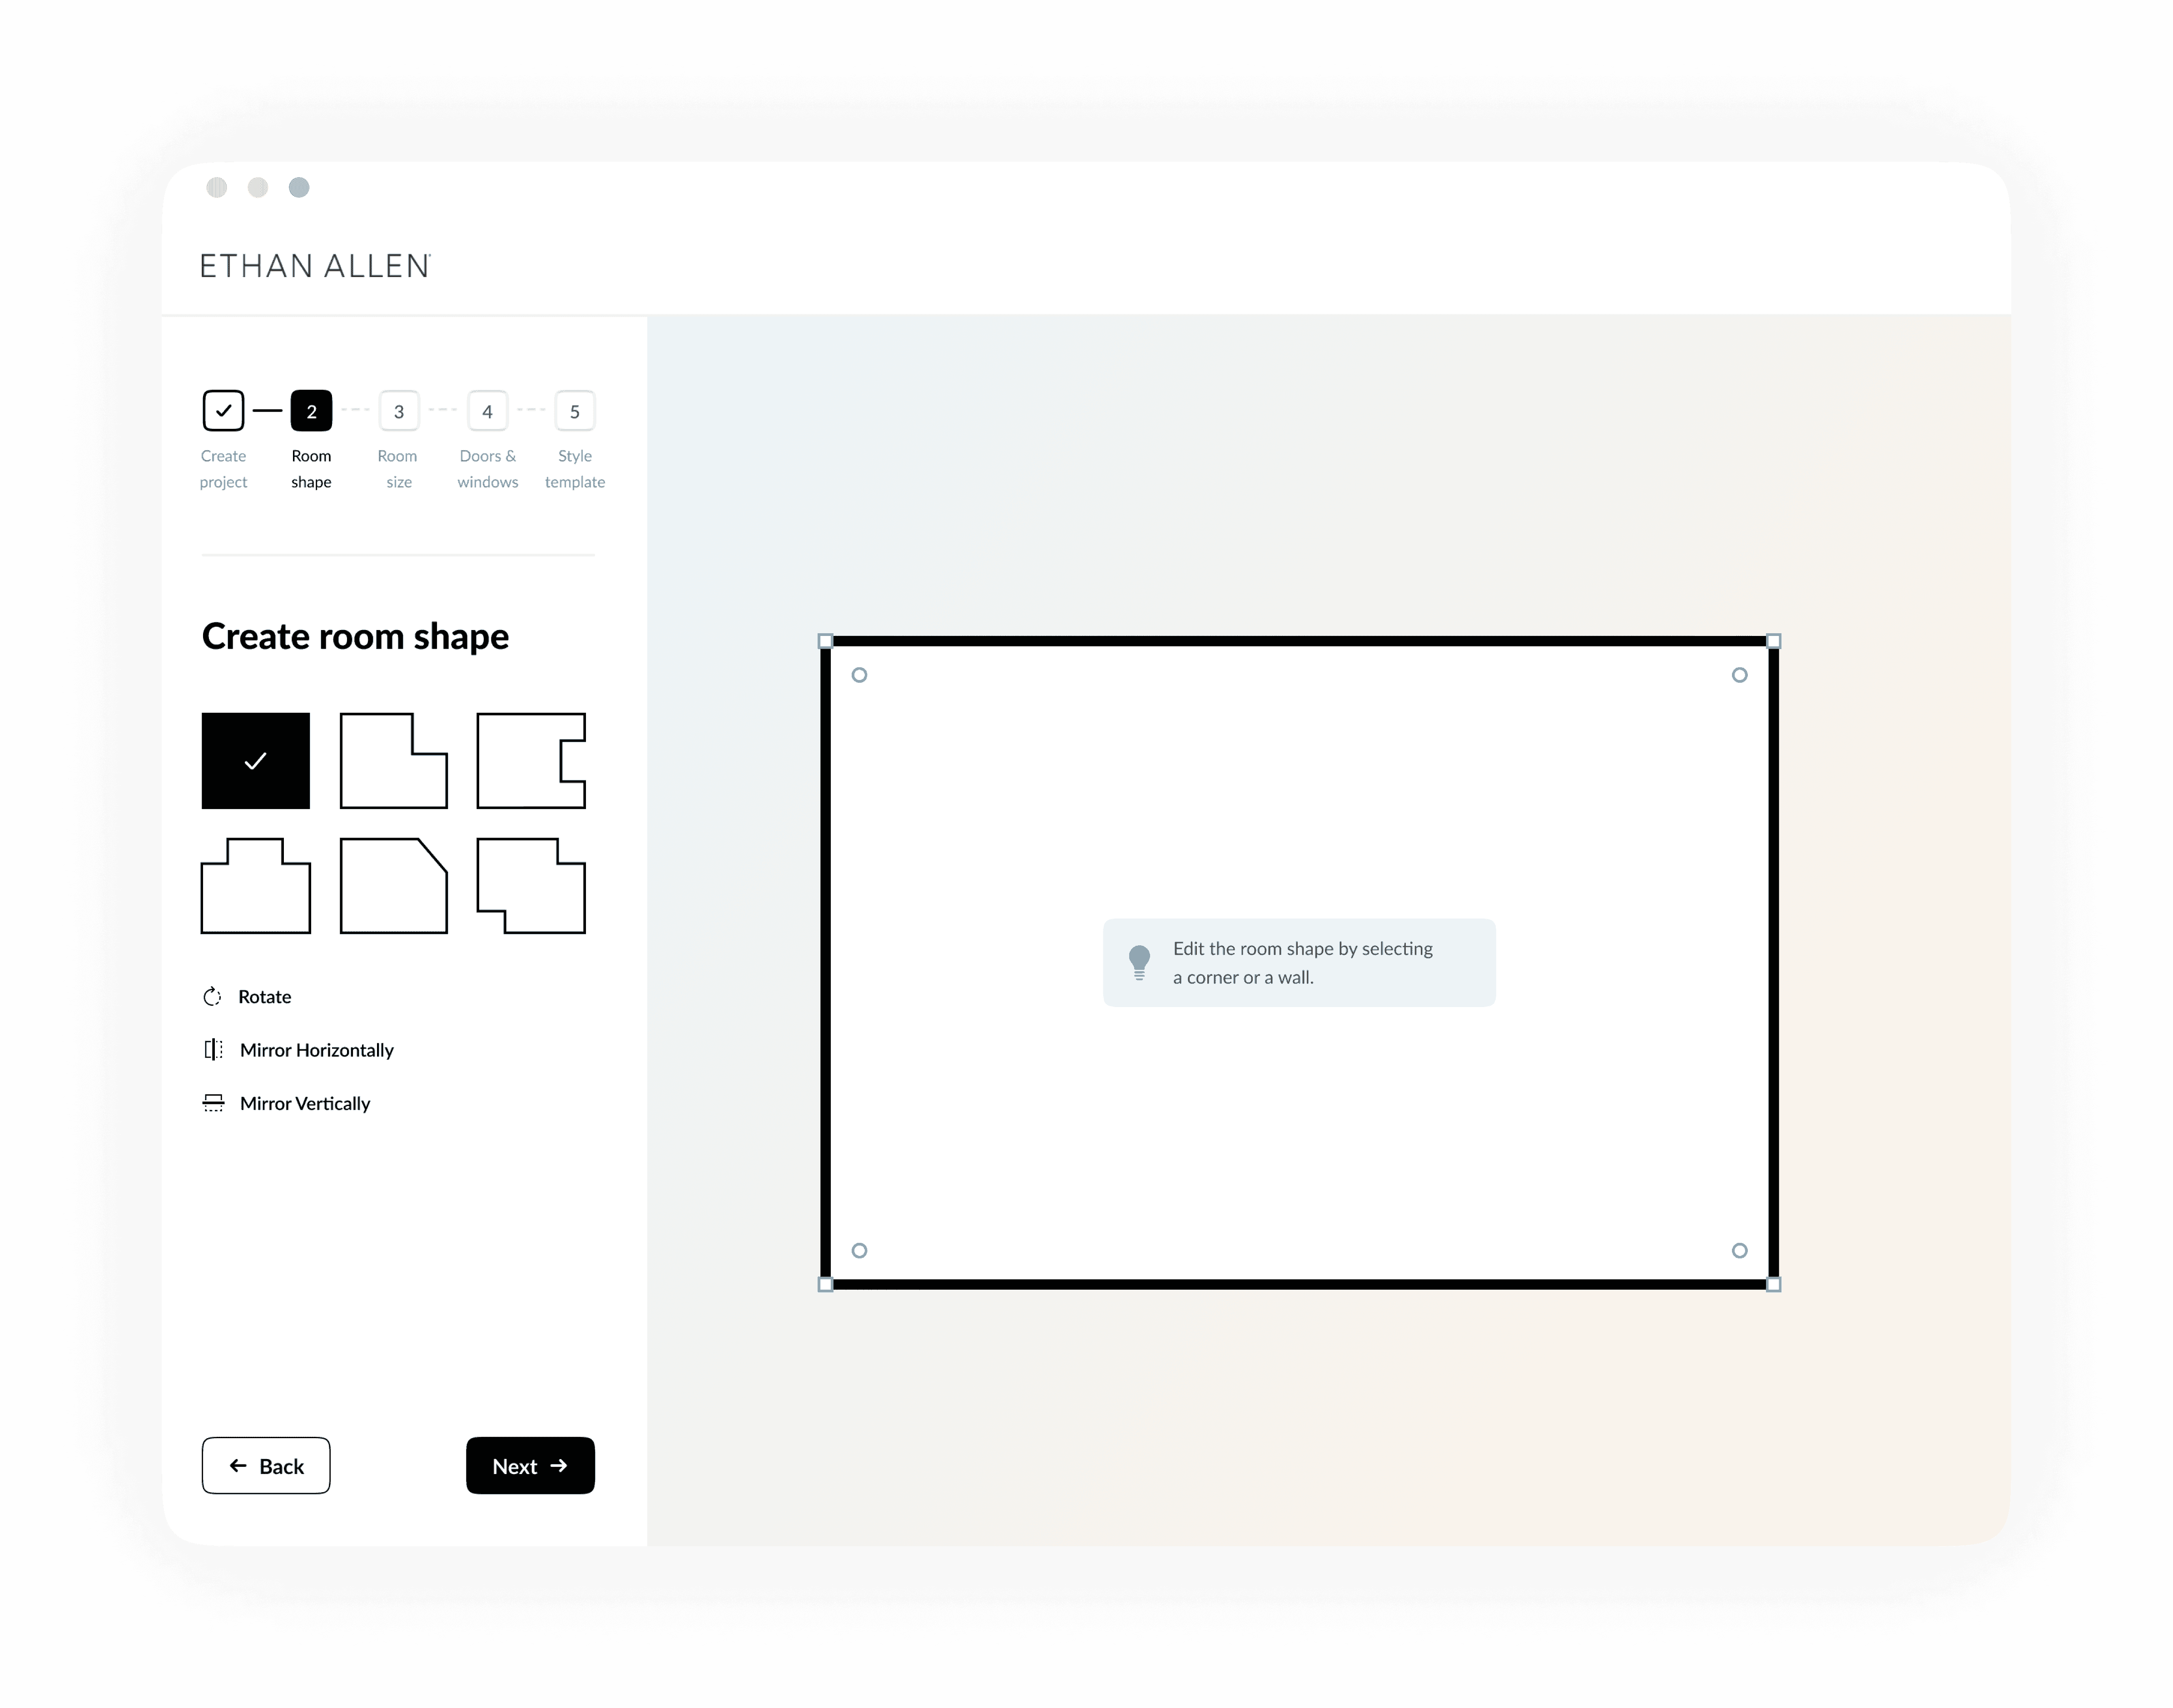 New design of step 2 on the onboarding.